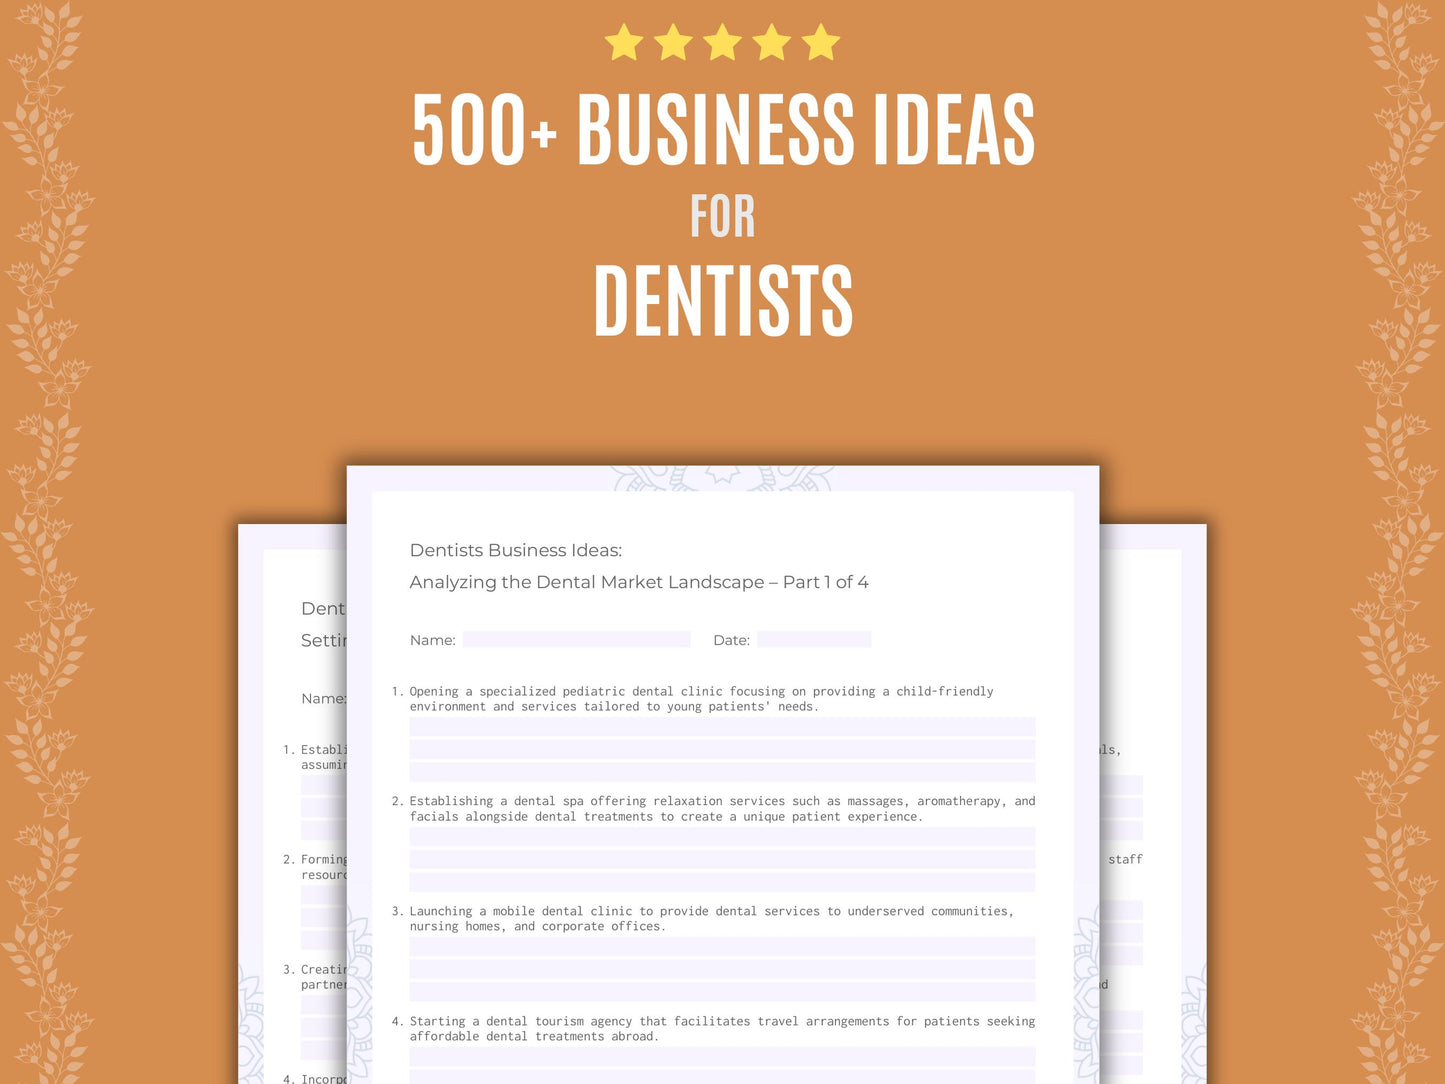 Dentists Business